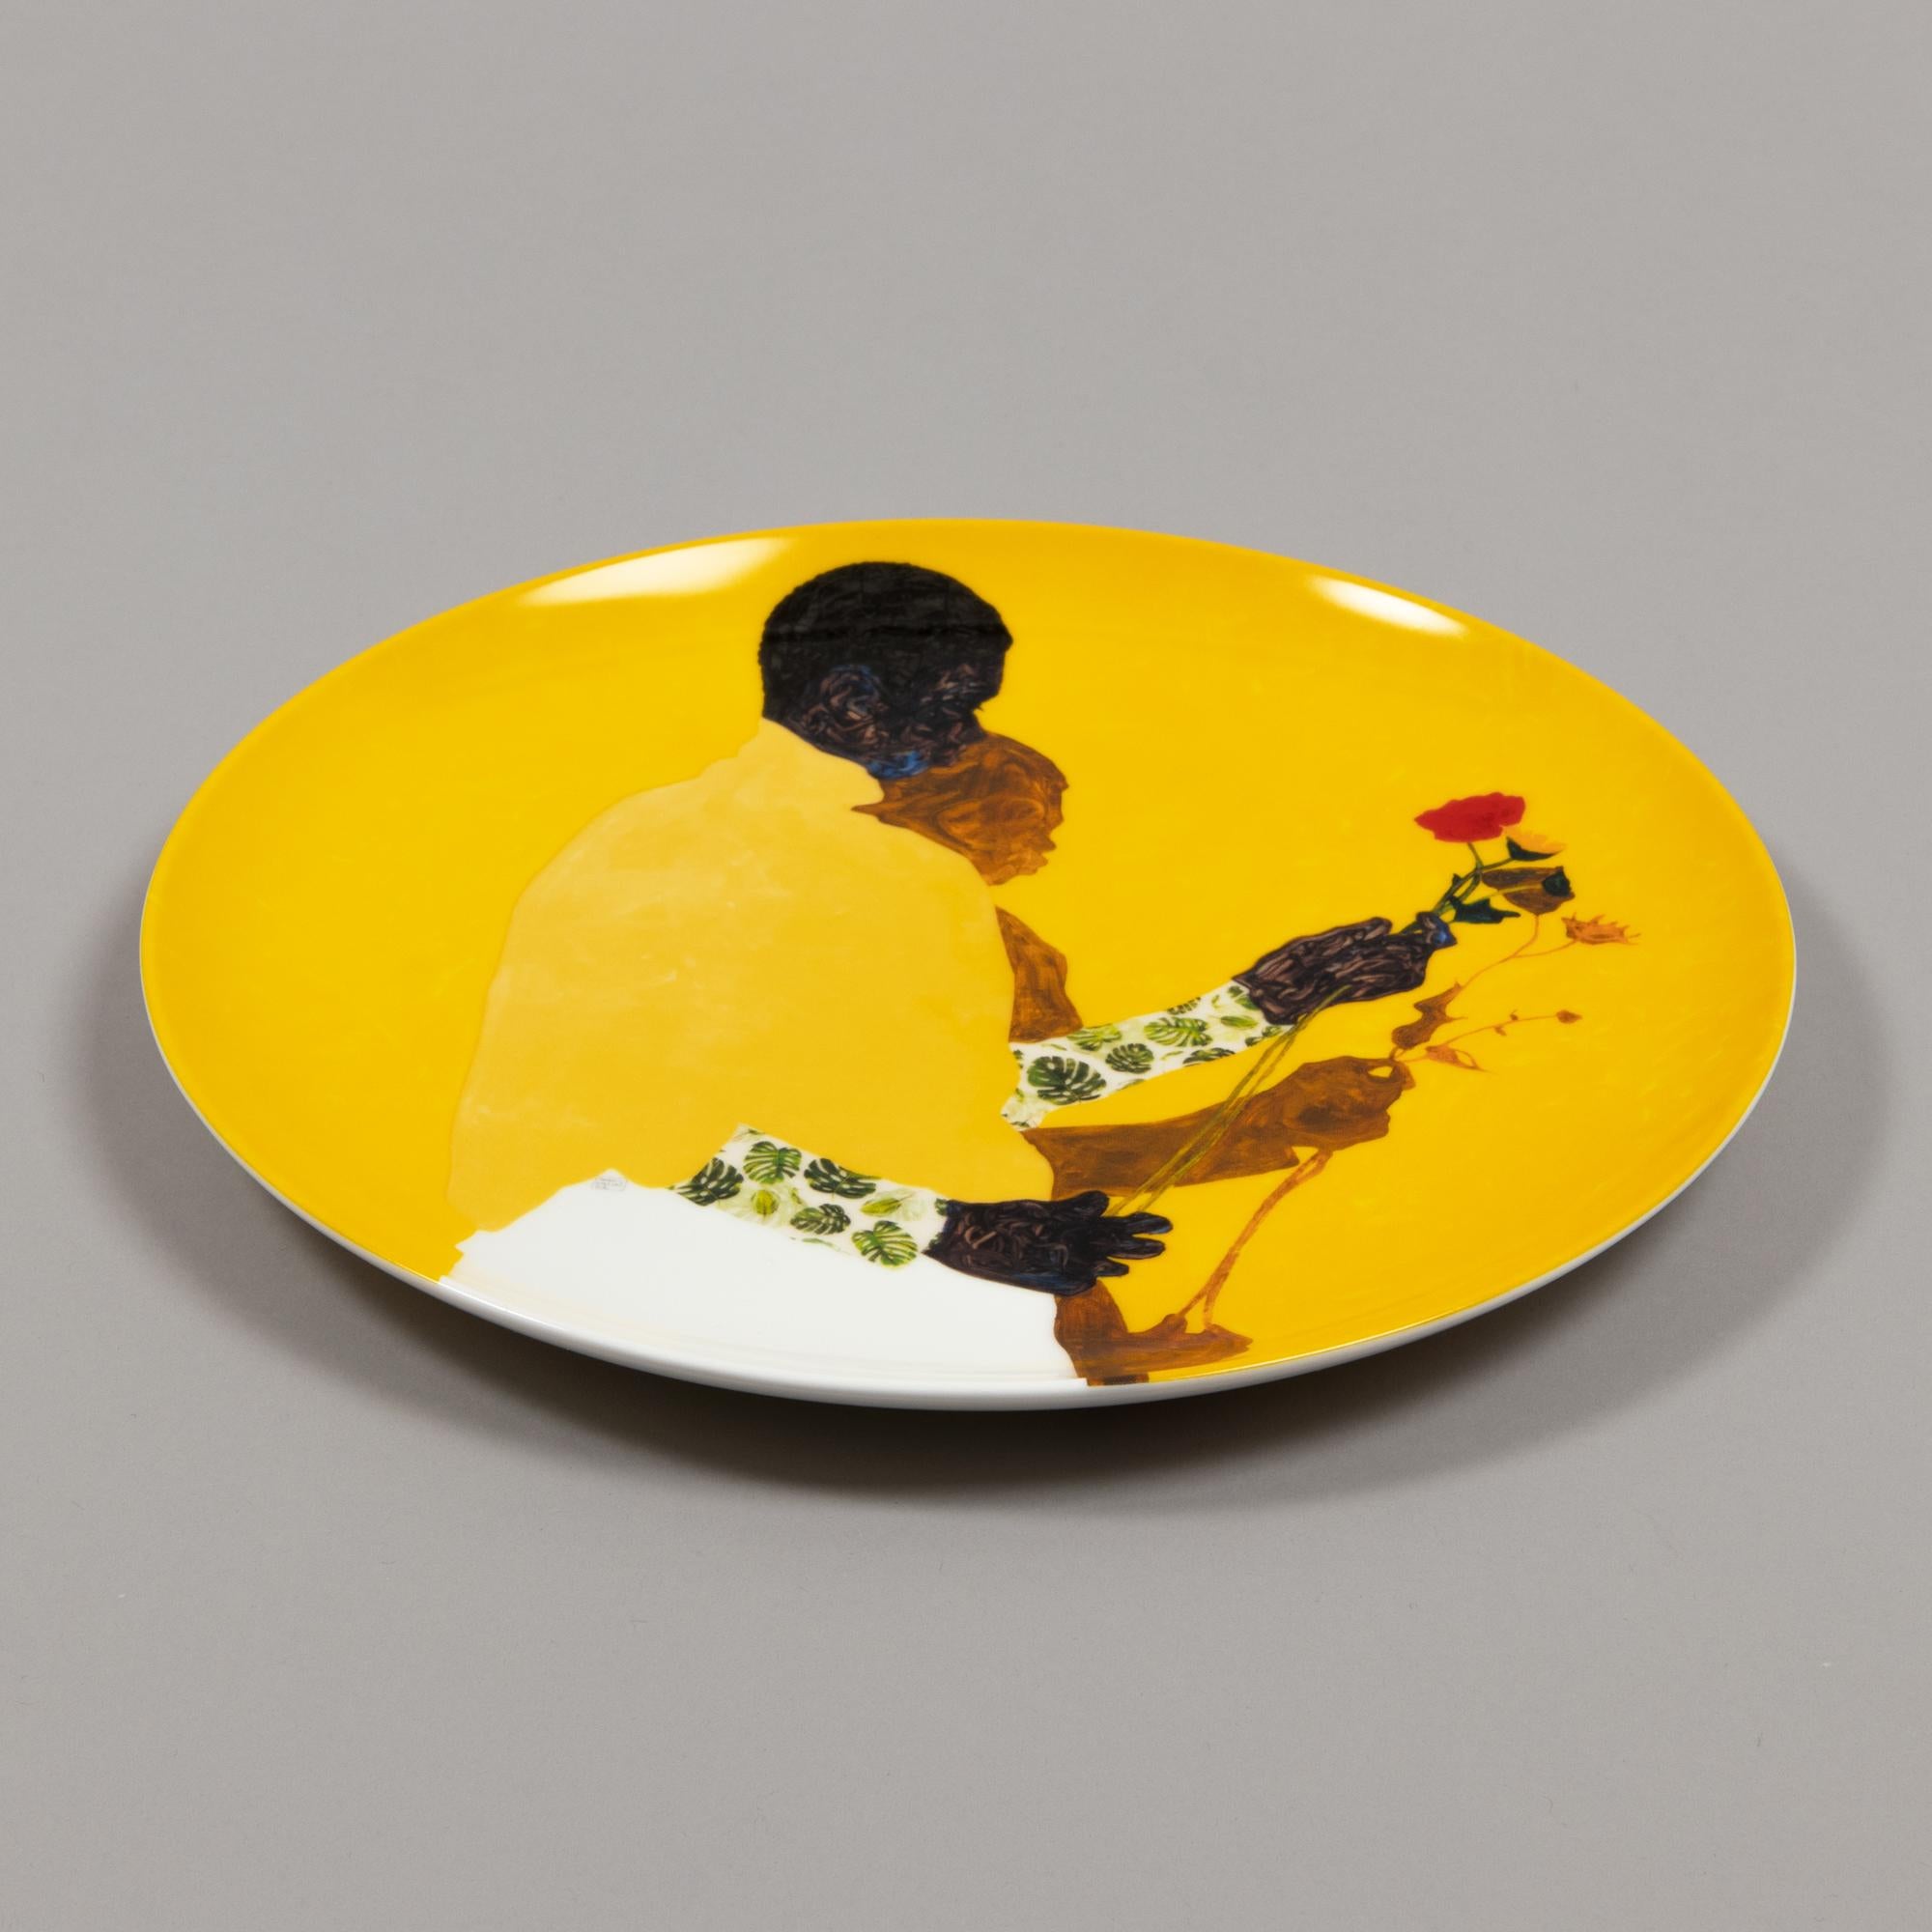 Amoako Boafo, Monstera Leaf Sleeve - Limited Edition Plate, African Art 1